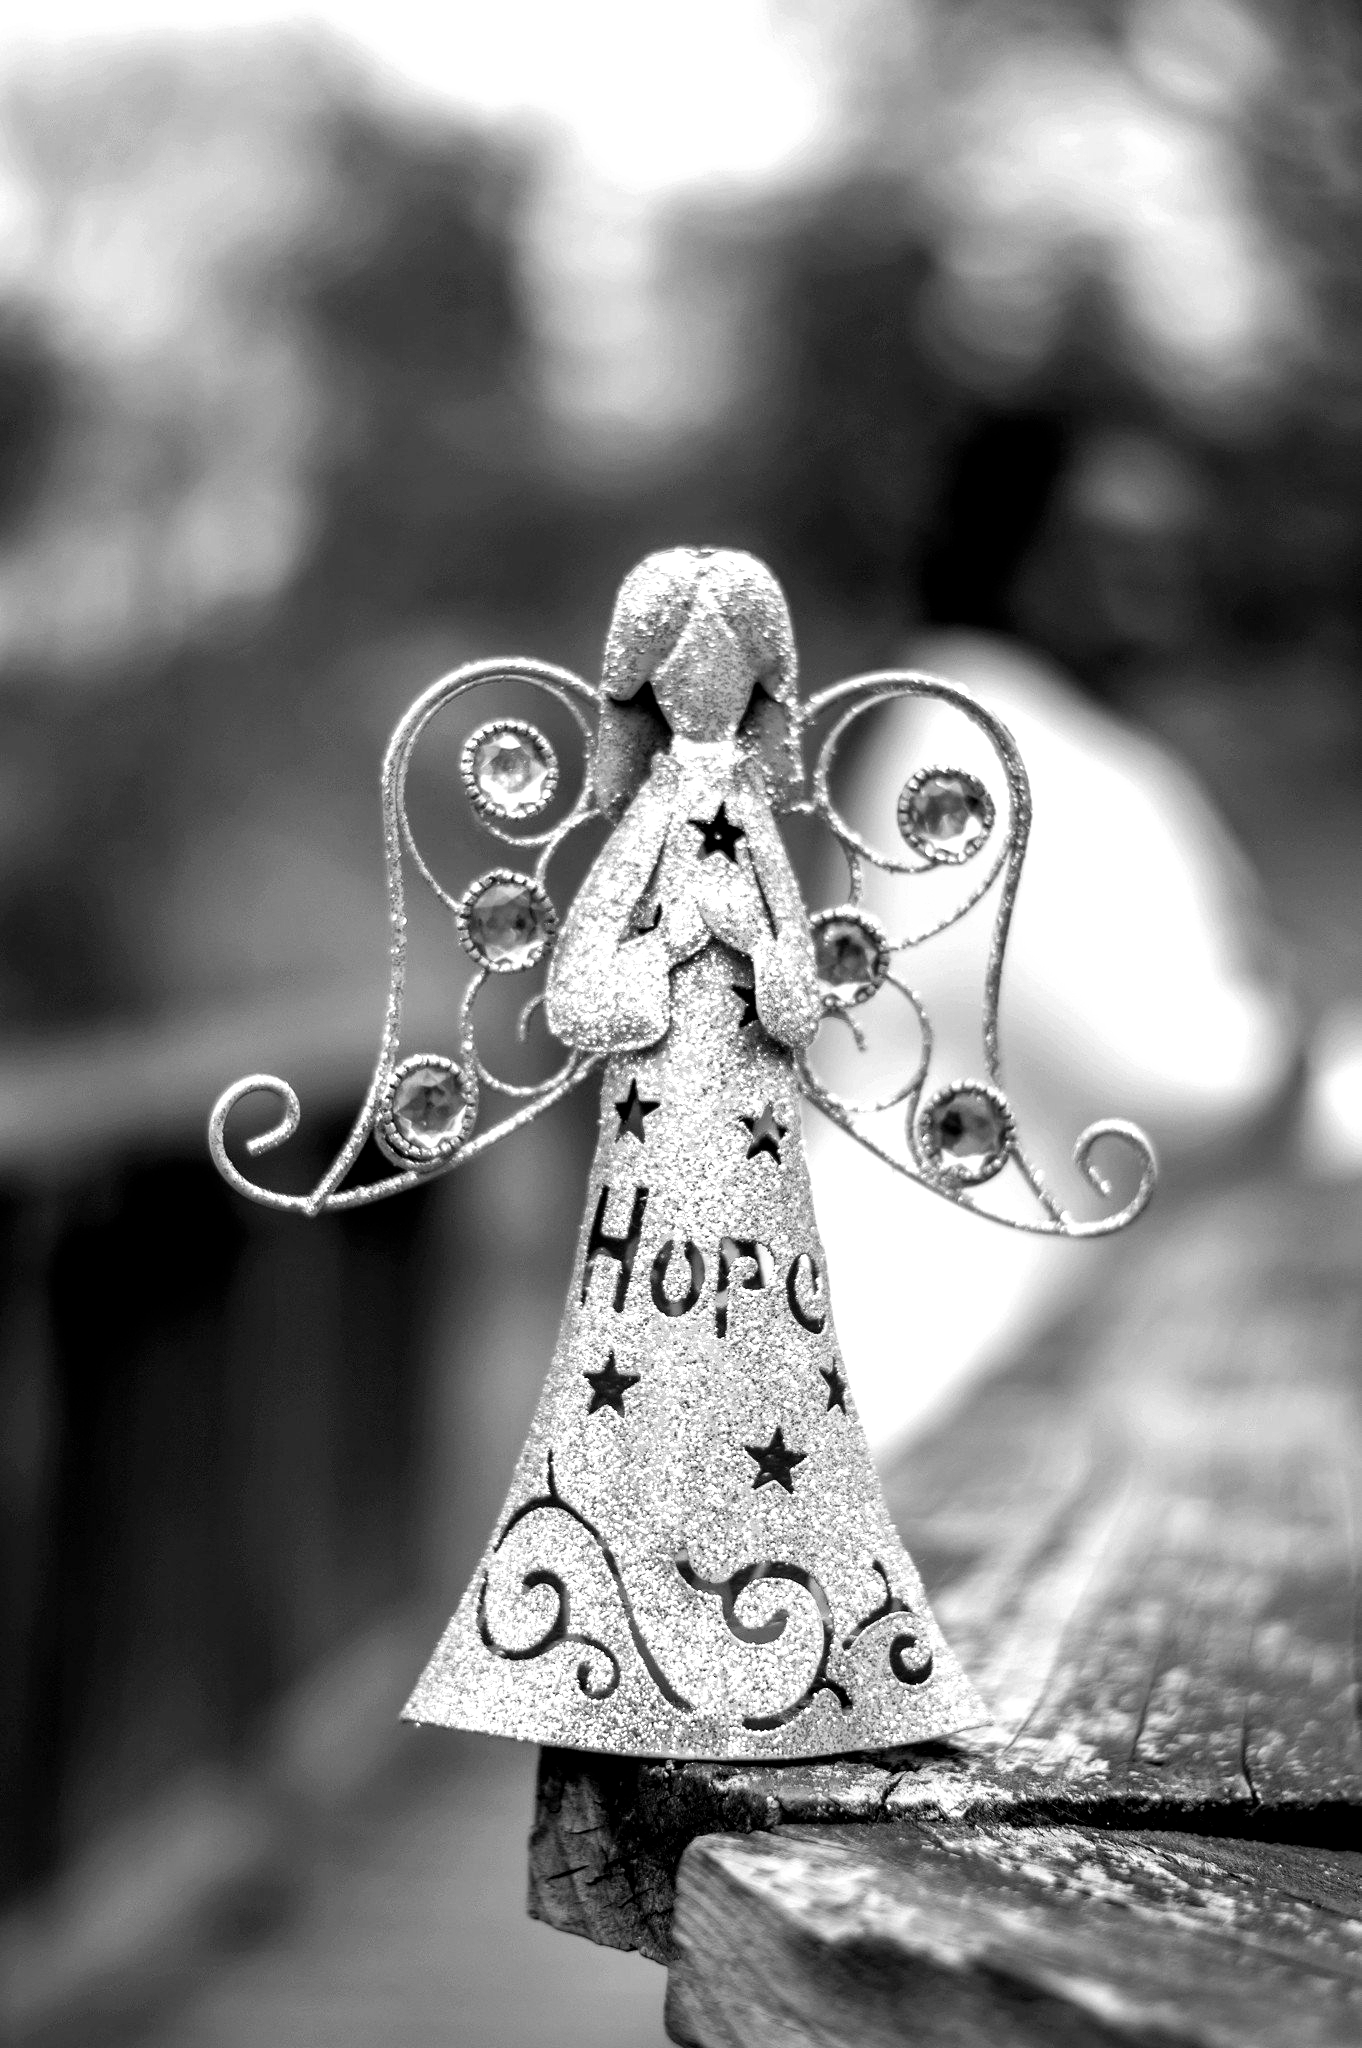 Angel ornament with hope engraved in the center